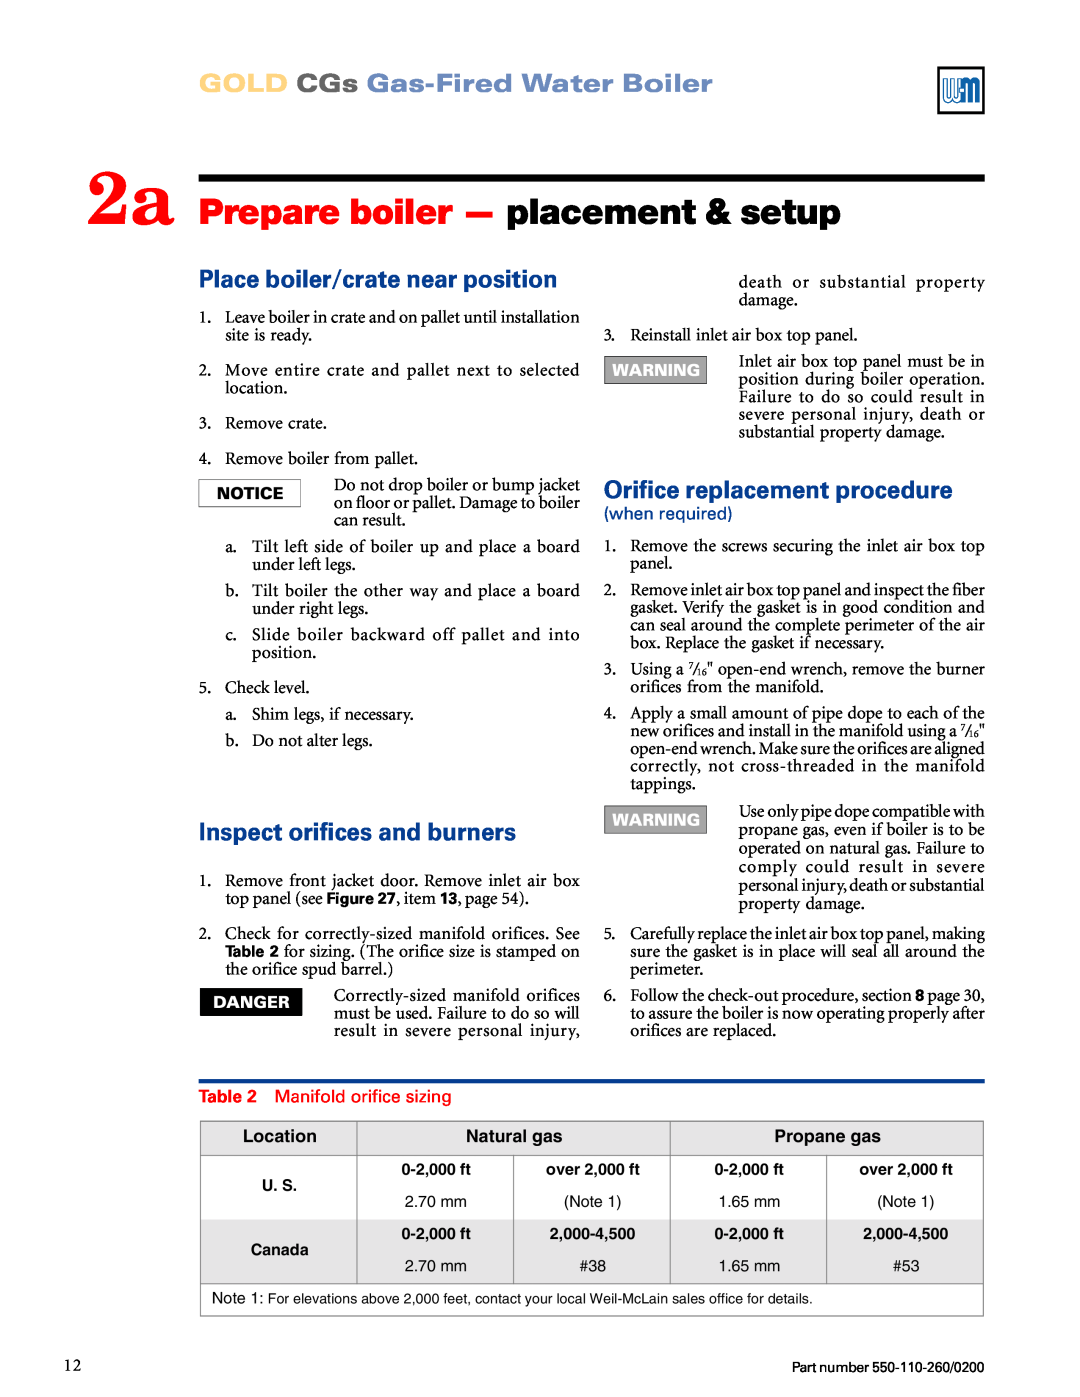 Weil-McLain 550-110-260/02002 manual 2a Prepare boiler — placement & setup, Place boiler/crate near position, when required 